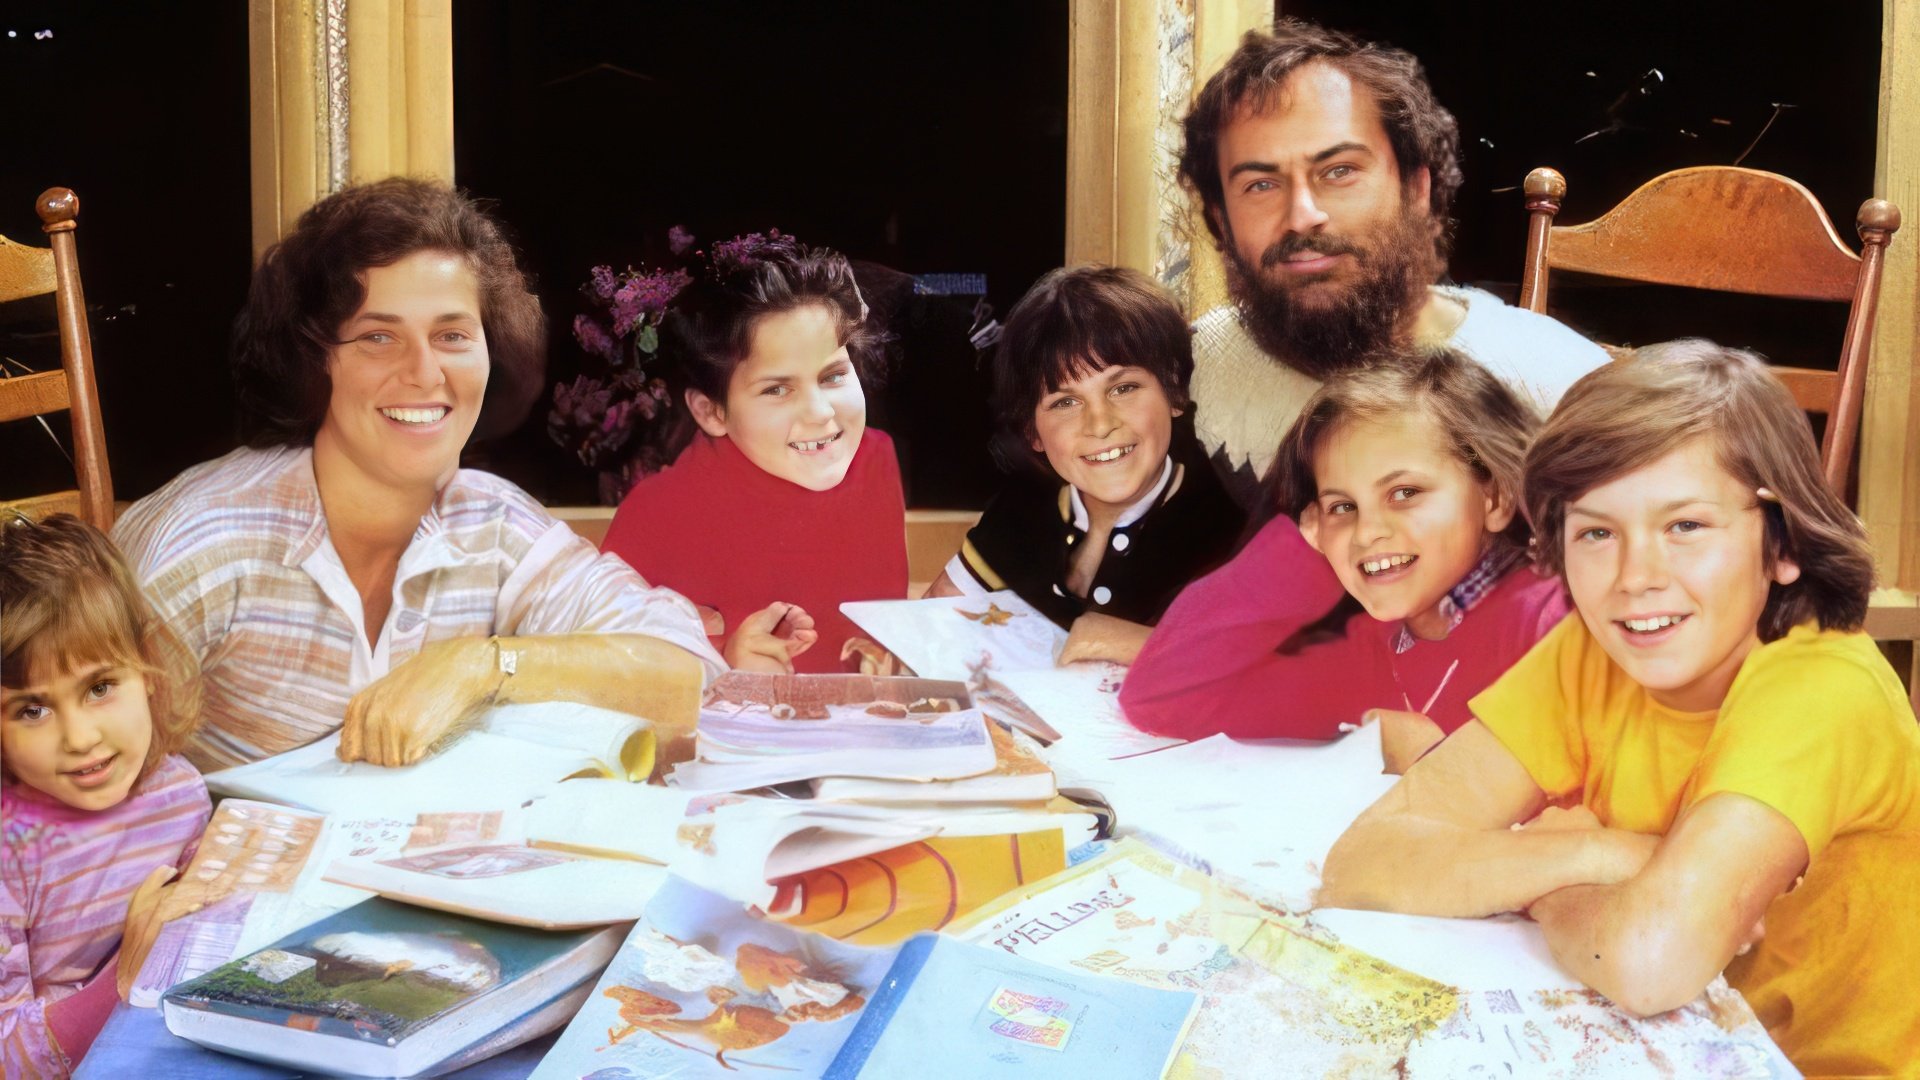 After their move to Los Angeles, Joaquin’s family changed their last name